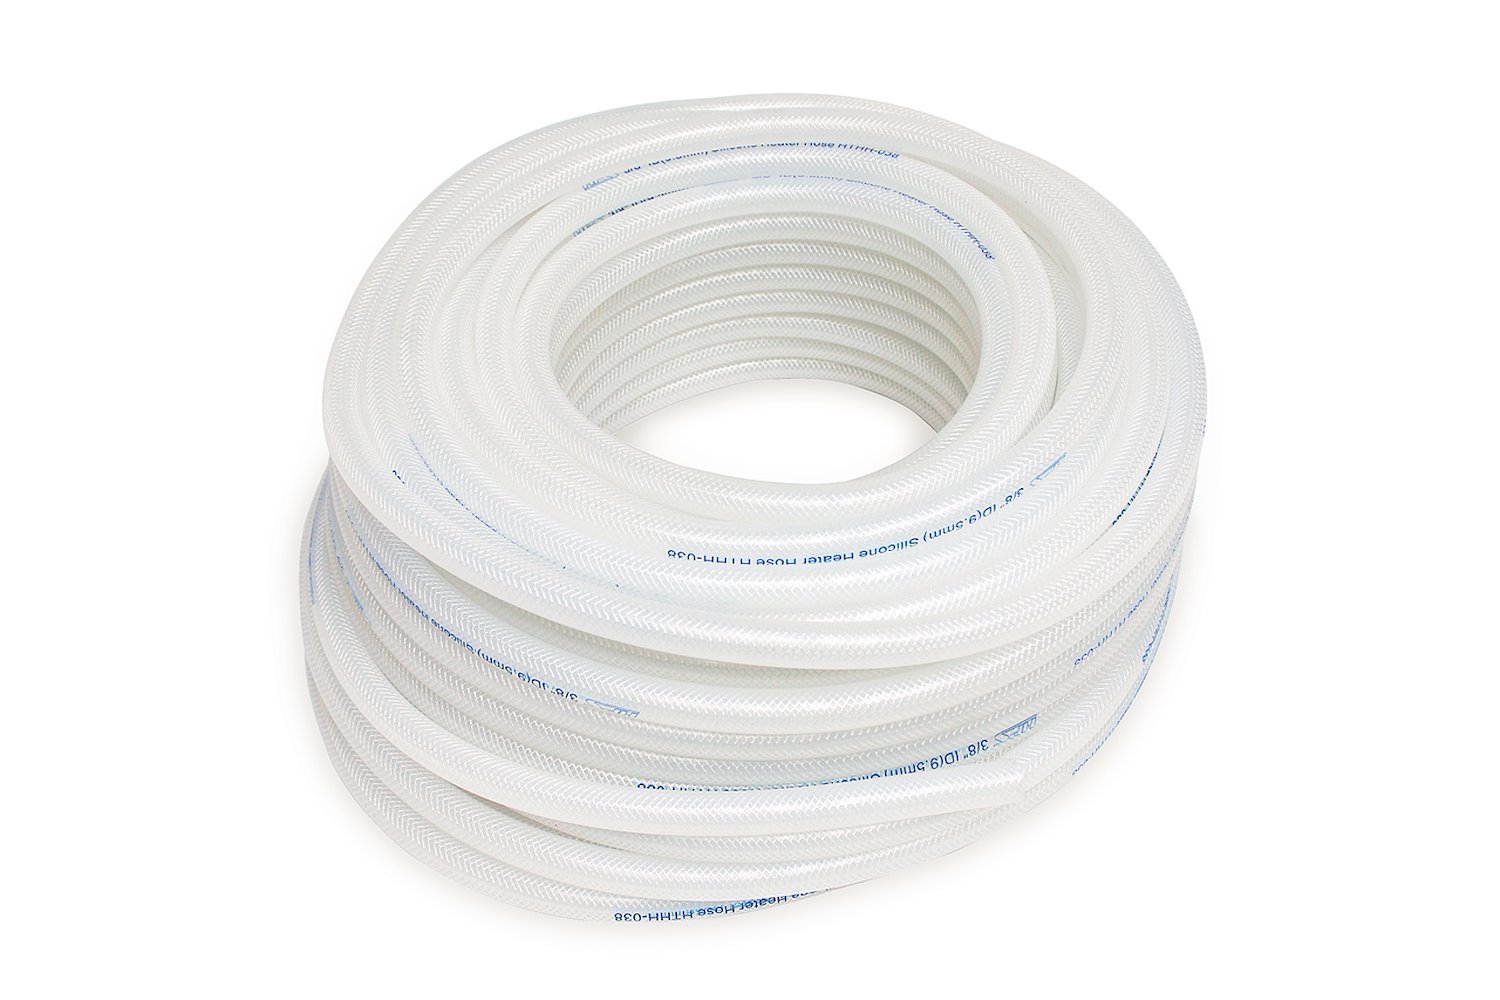 HTHH-038-CLEARx100 Silicone Heater Hose Tubing, High-Temp Reinforced, 3/8 in. ID, 100 ft. Roll, Clear